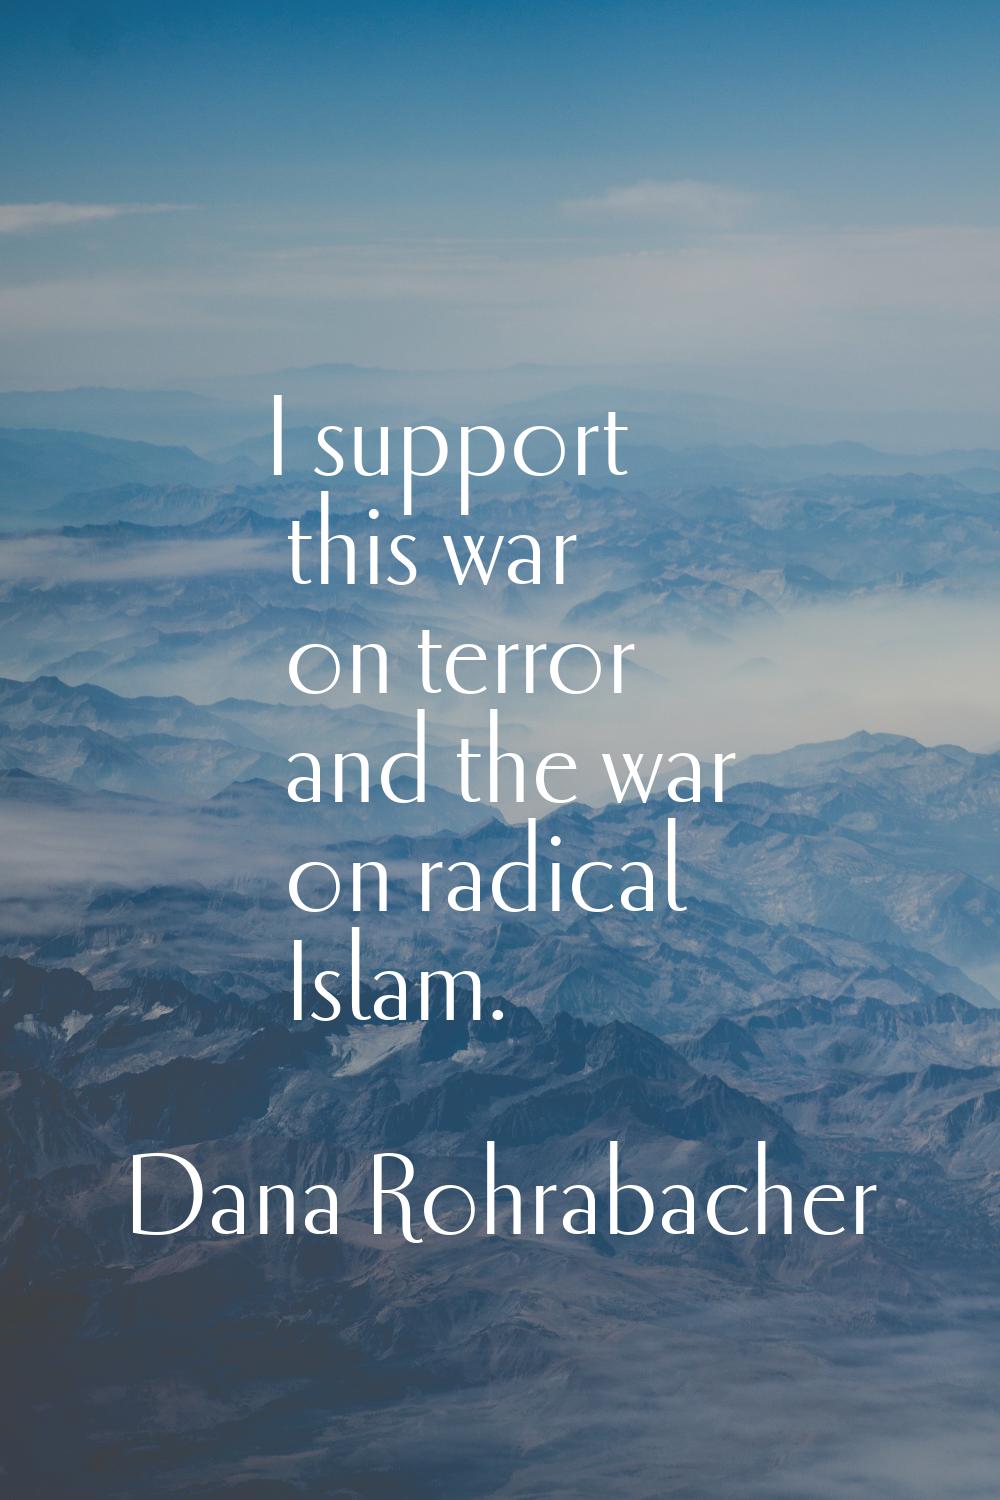 I support this war on terror and the war on radical Islam.